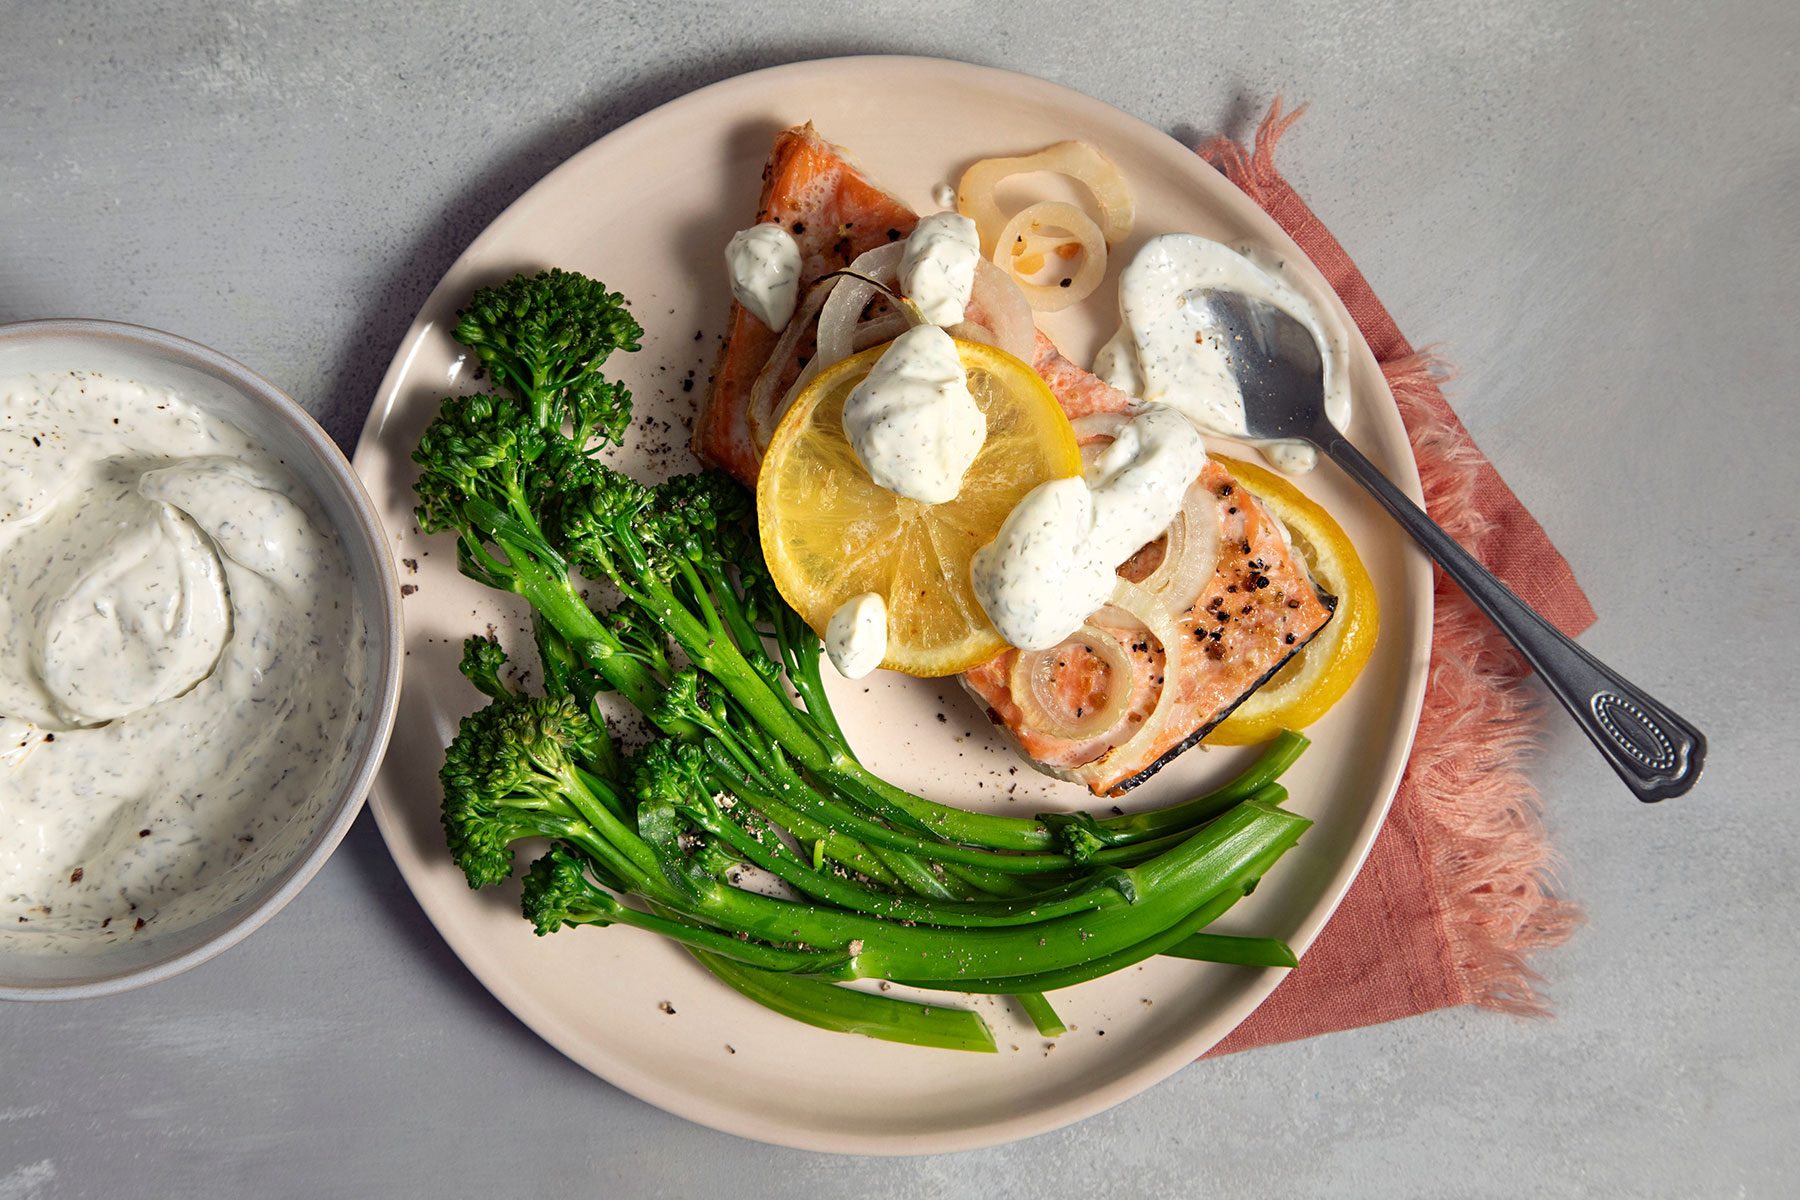 Dill Sauce For Salmon served on lemon slices and other vegetables 